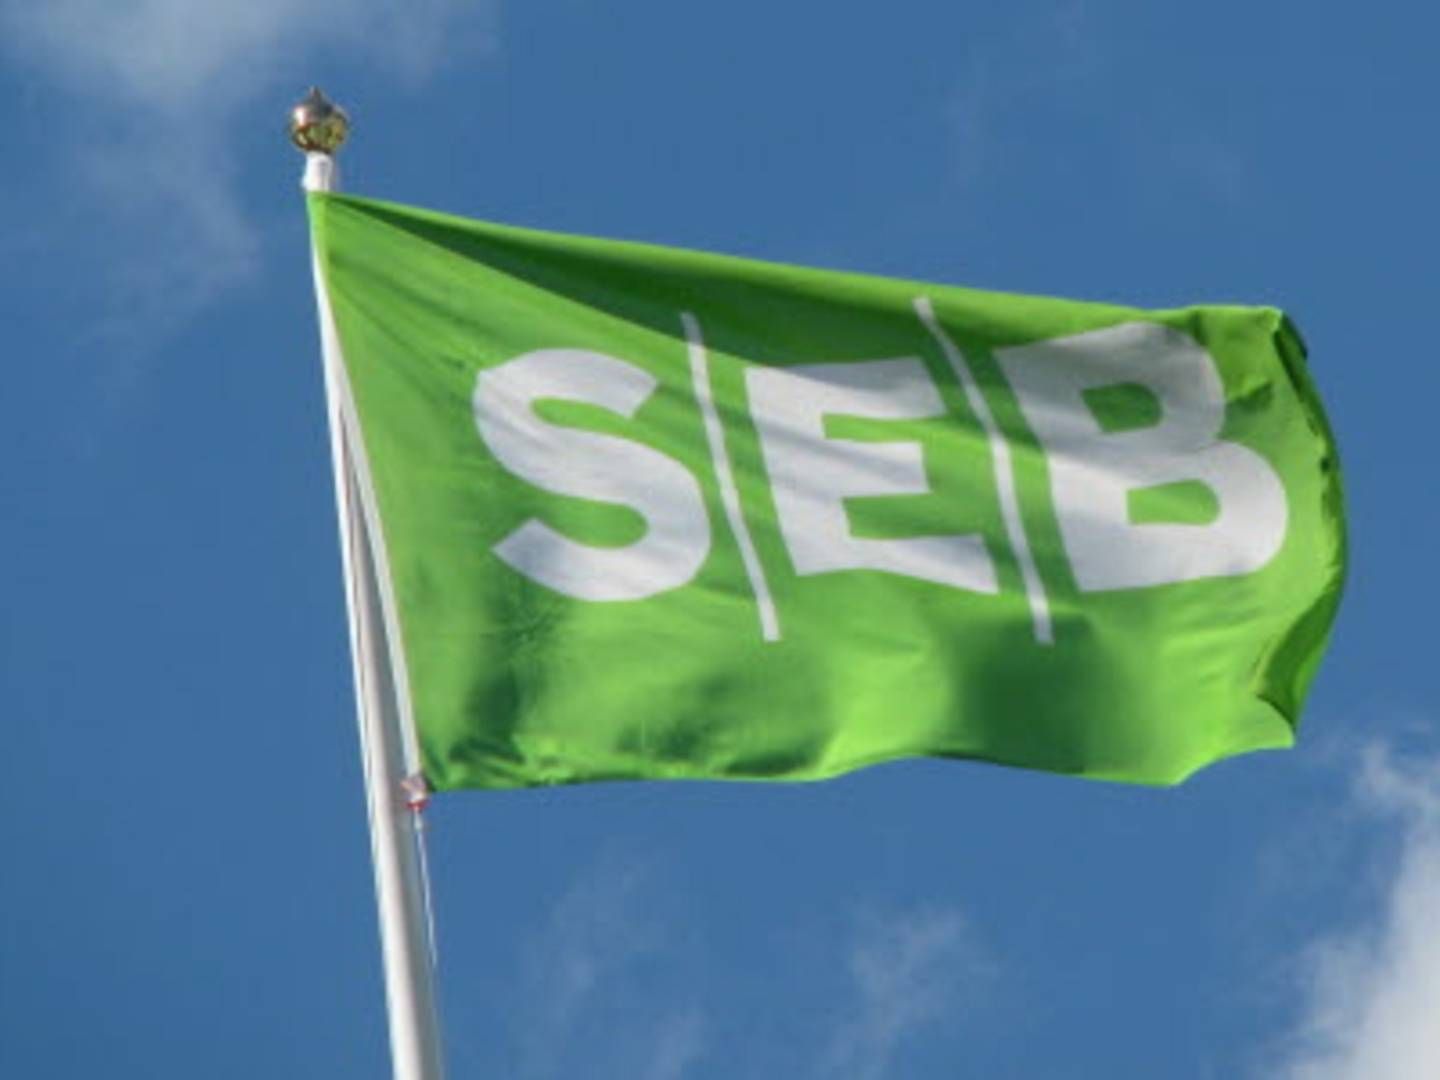 Stockholm-based SEB has SEK 2,018bn in assets under management by the end of Q3. | Photo: PR/SEB